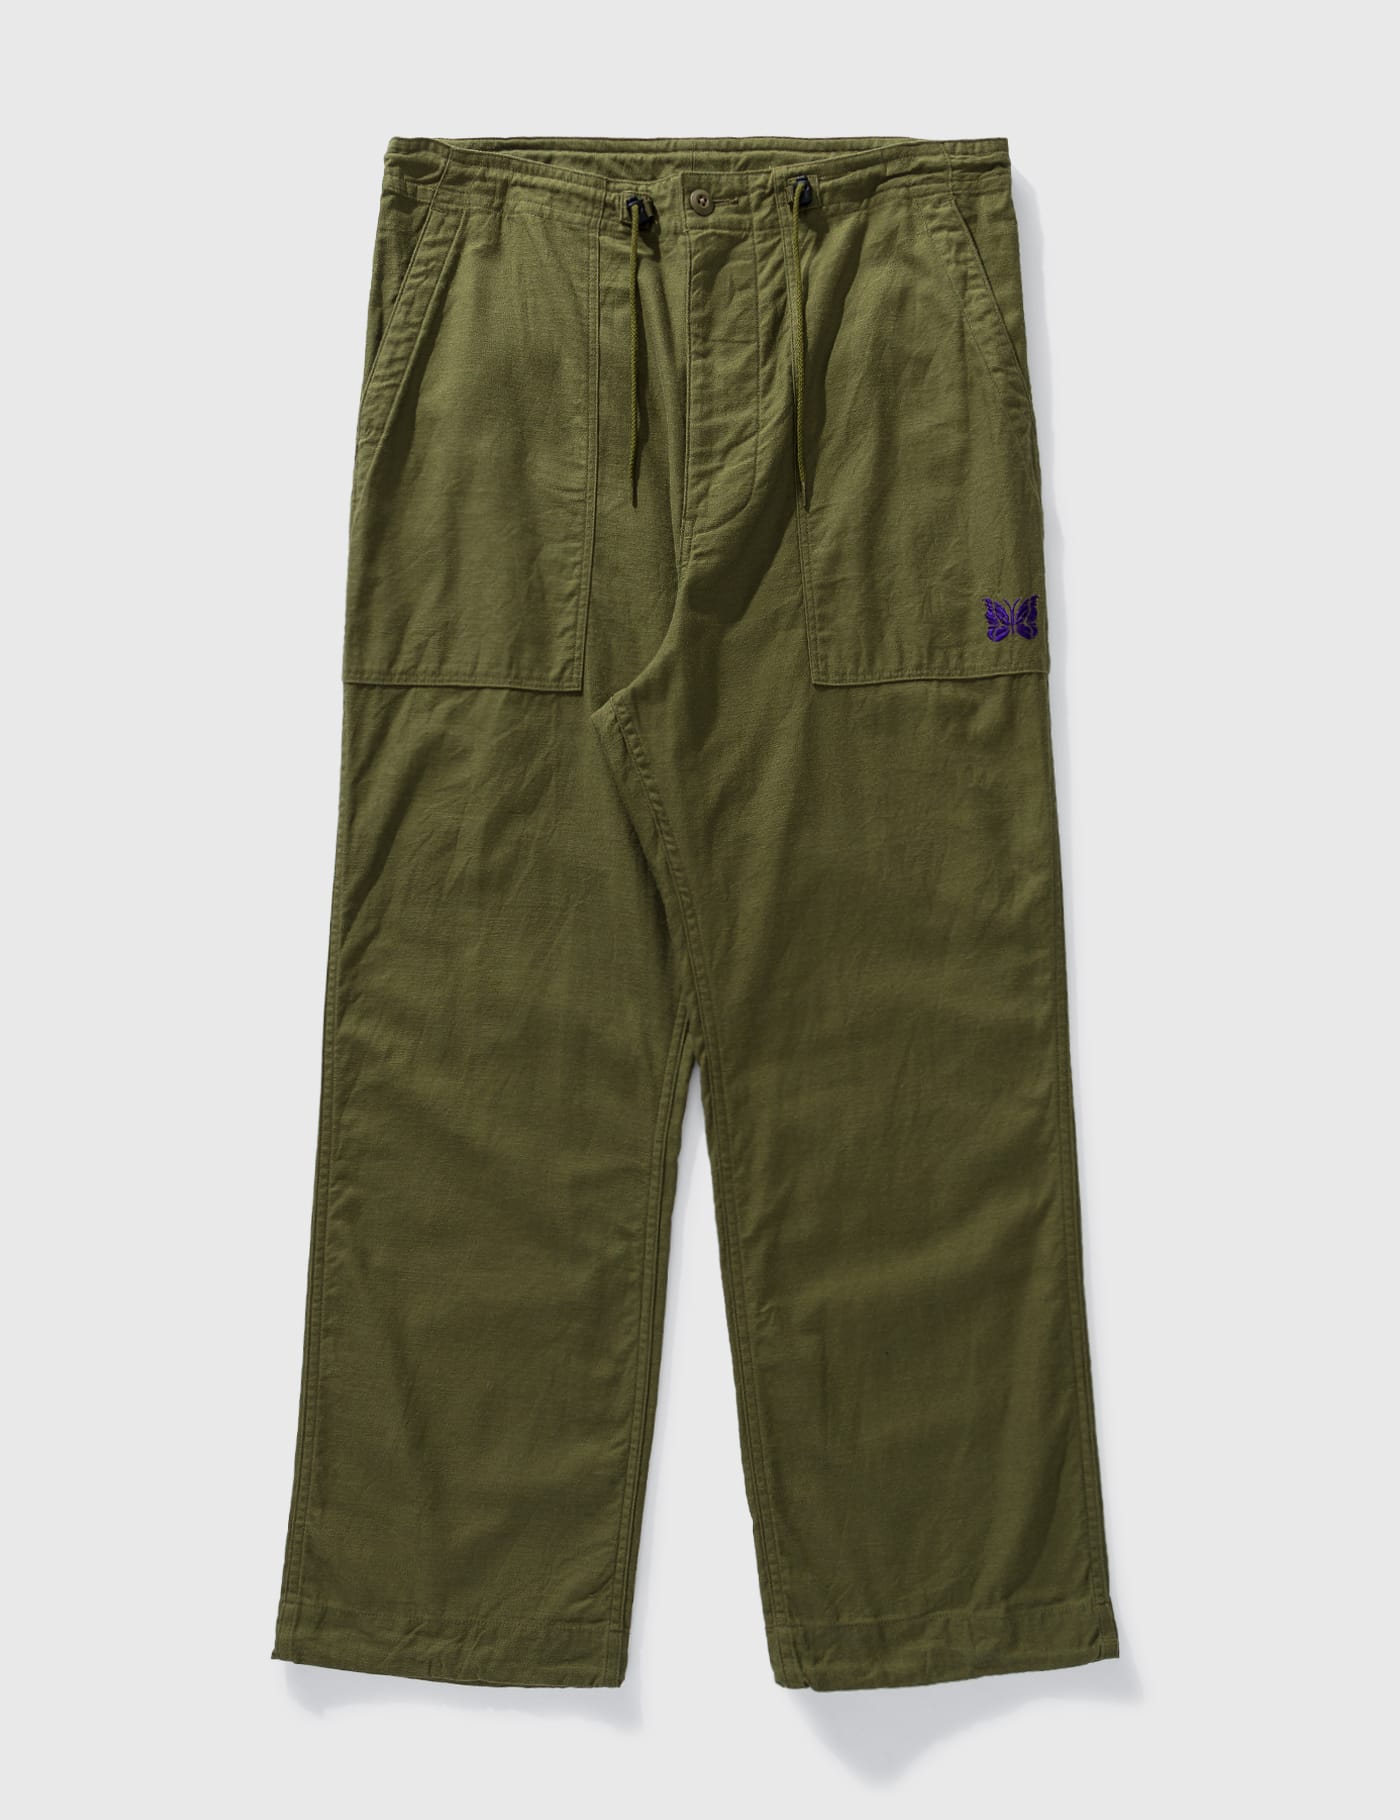 Needles - String Fatigue Pants | HBX - Globally Curated Fashion 